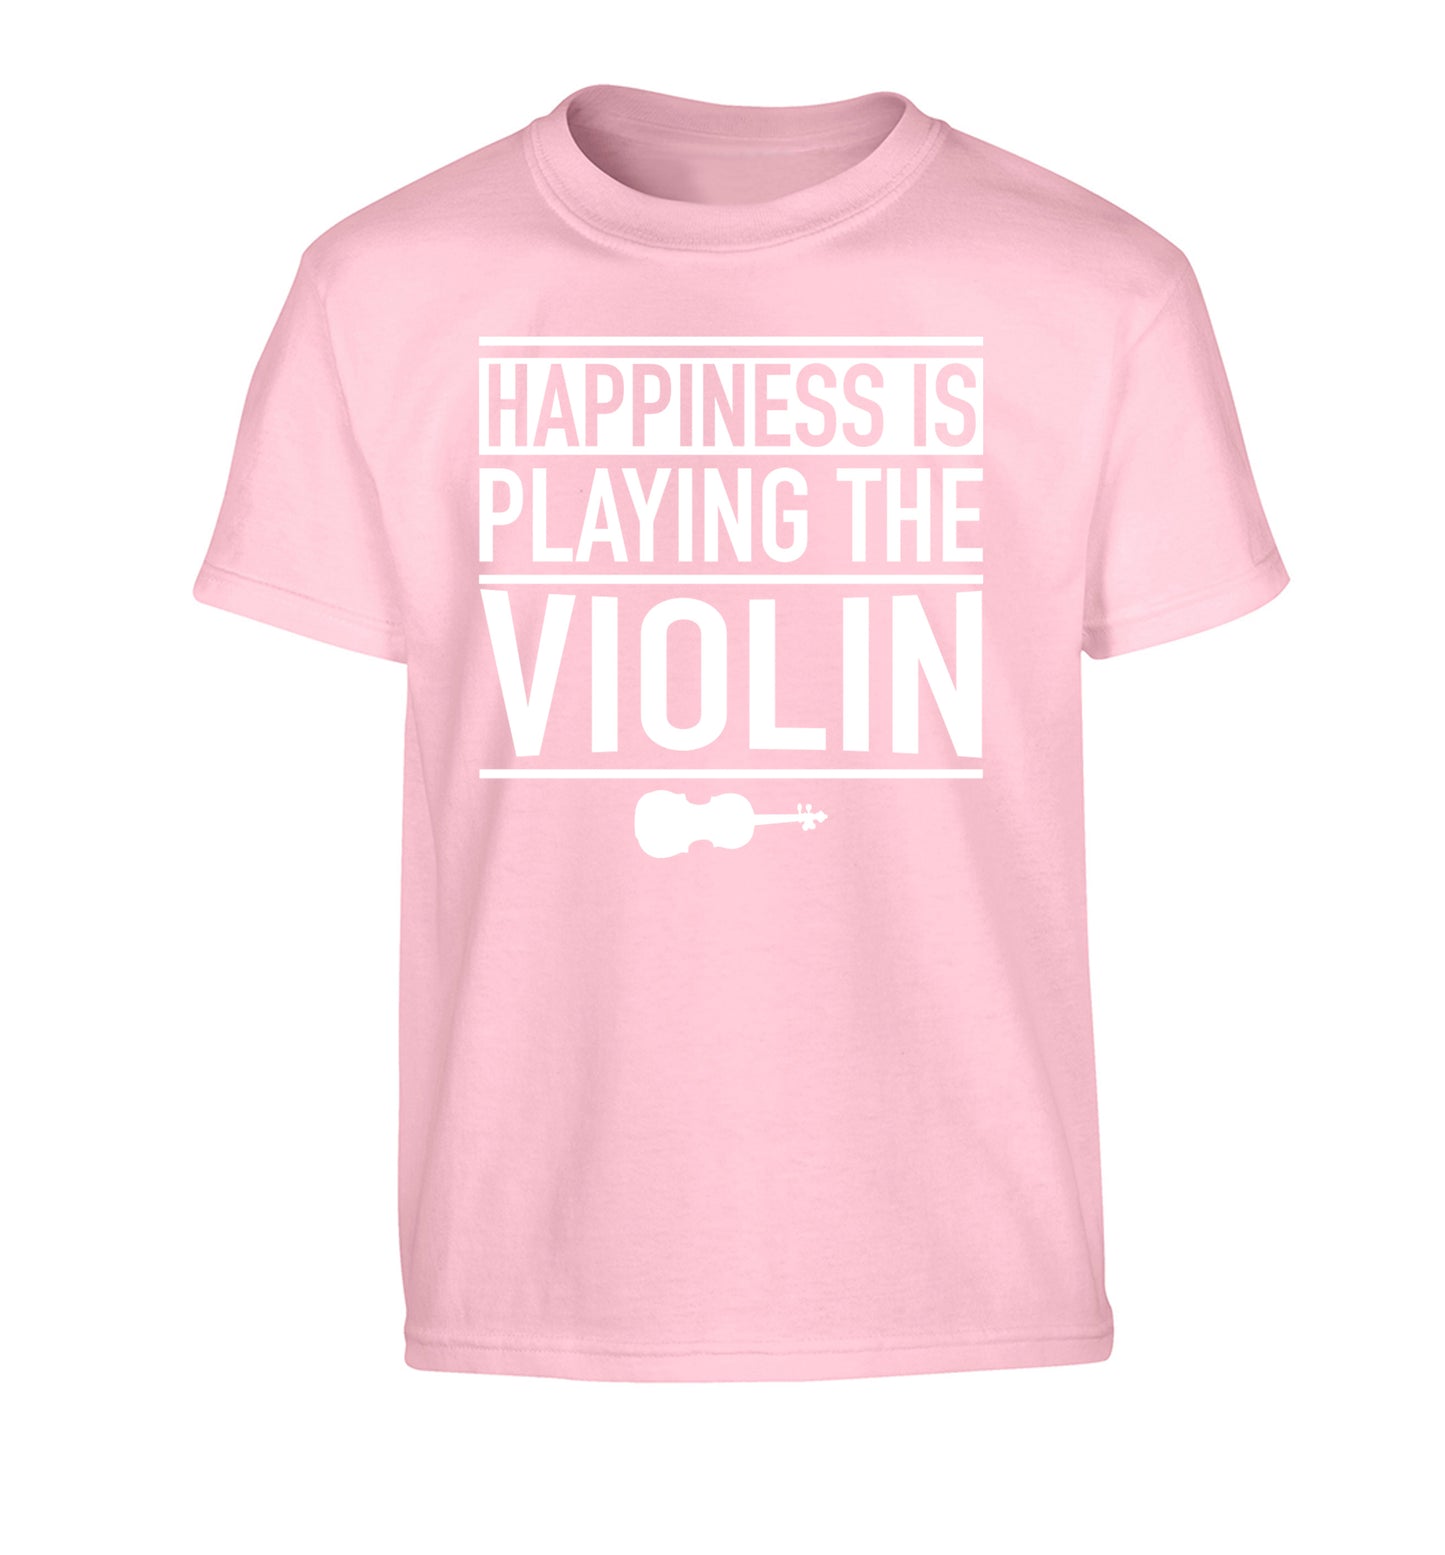 Happiness is playing the violin Children's light pink Tshirt 12-13 Years